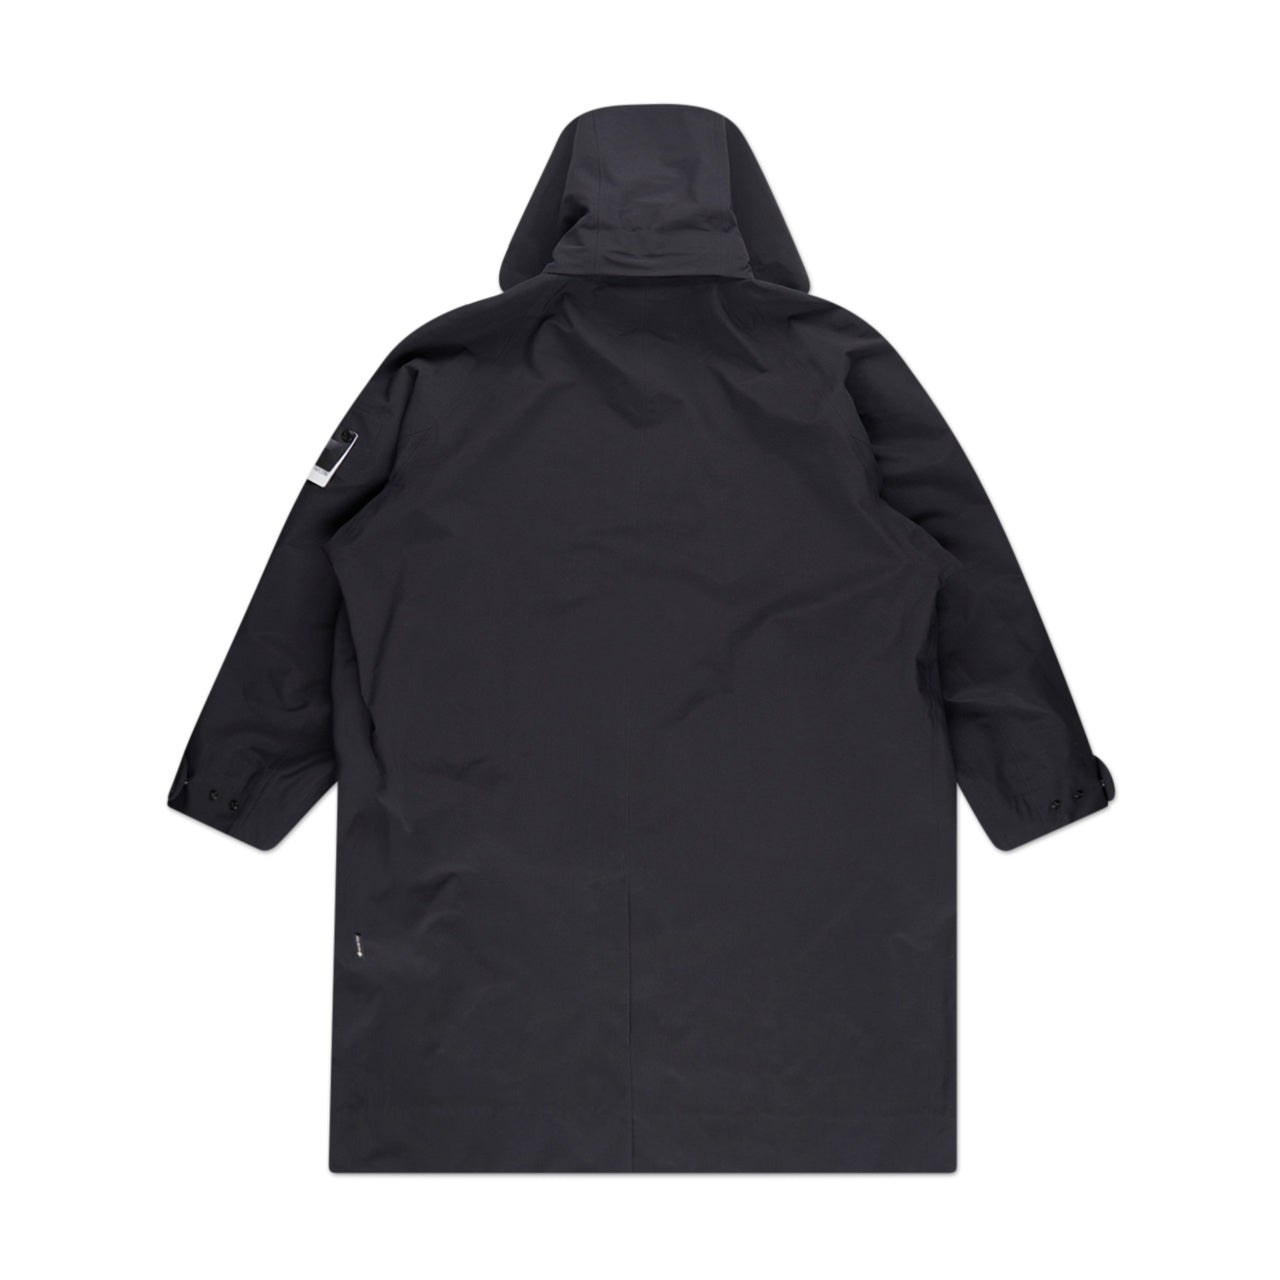 stone island shadow project trench coat (black)